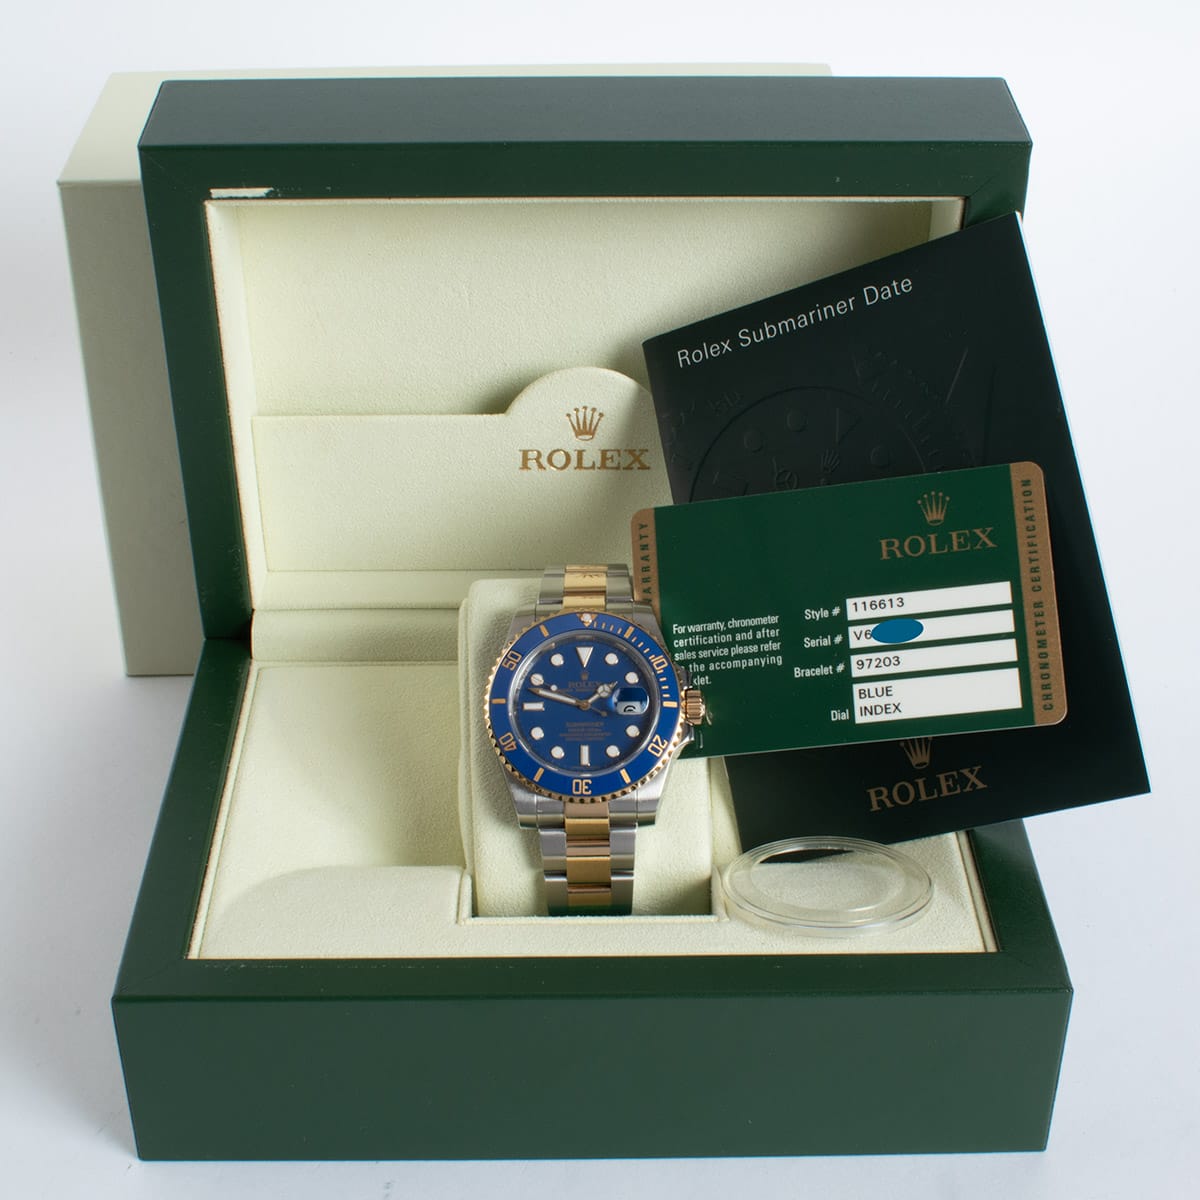 View in Box of Submariner Date